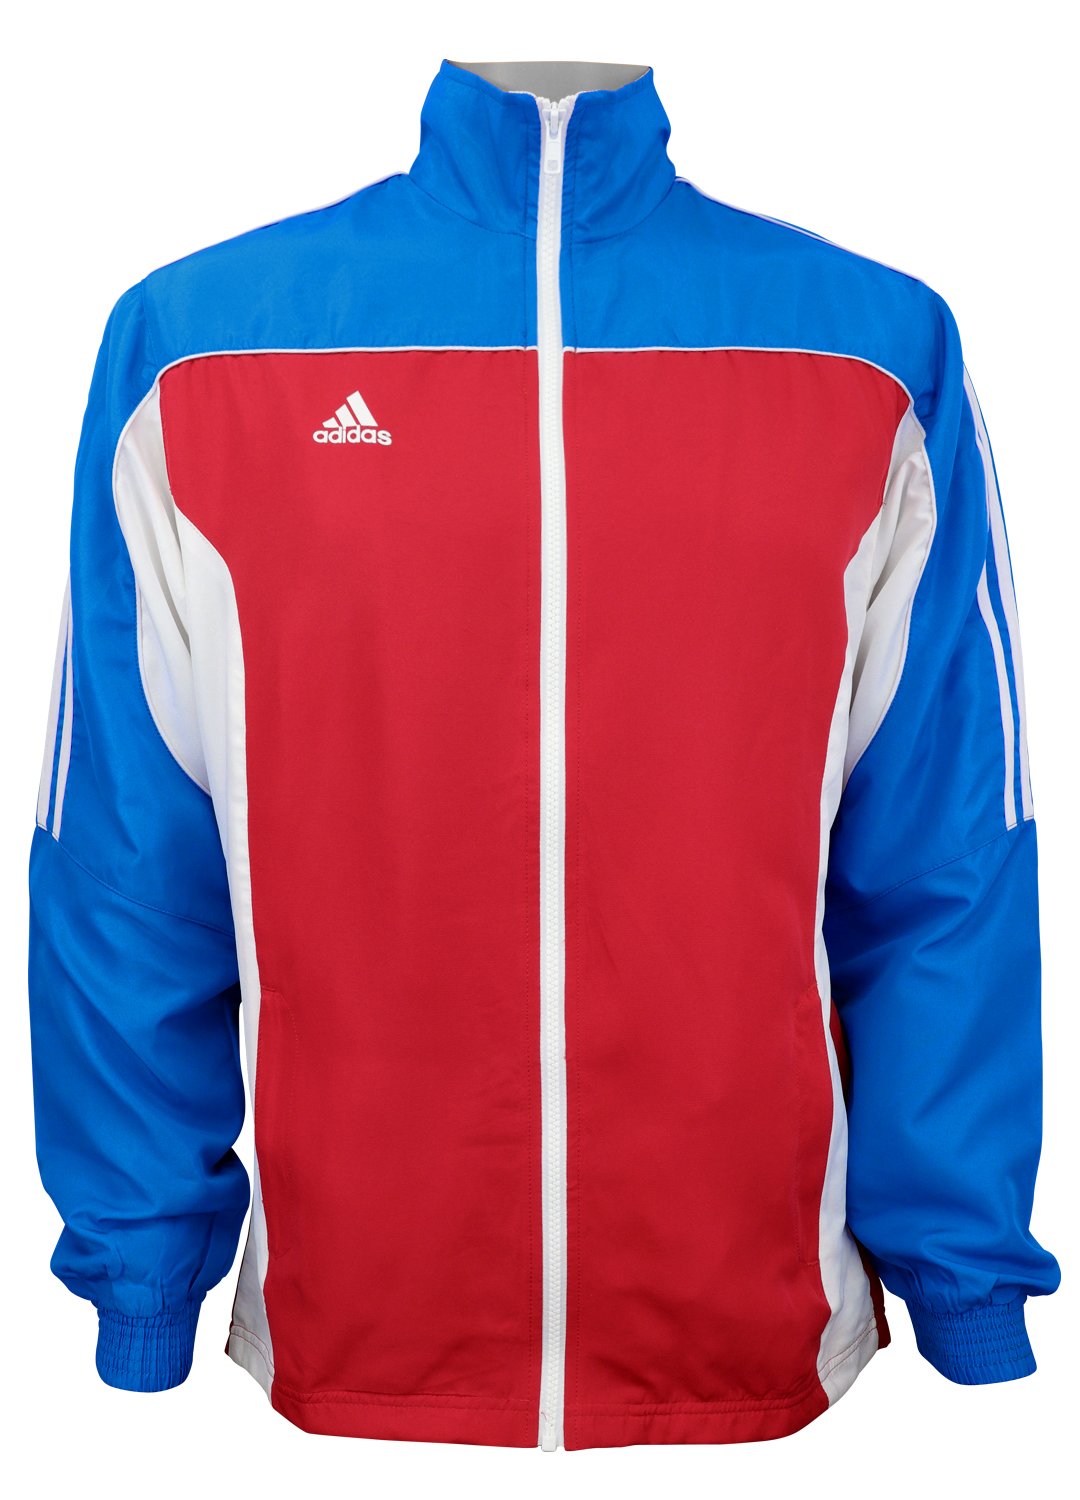 adidas Red White Blue Windbreaker Style Team Jacket Front View